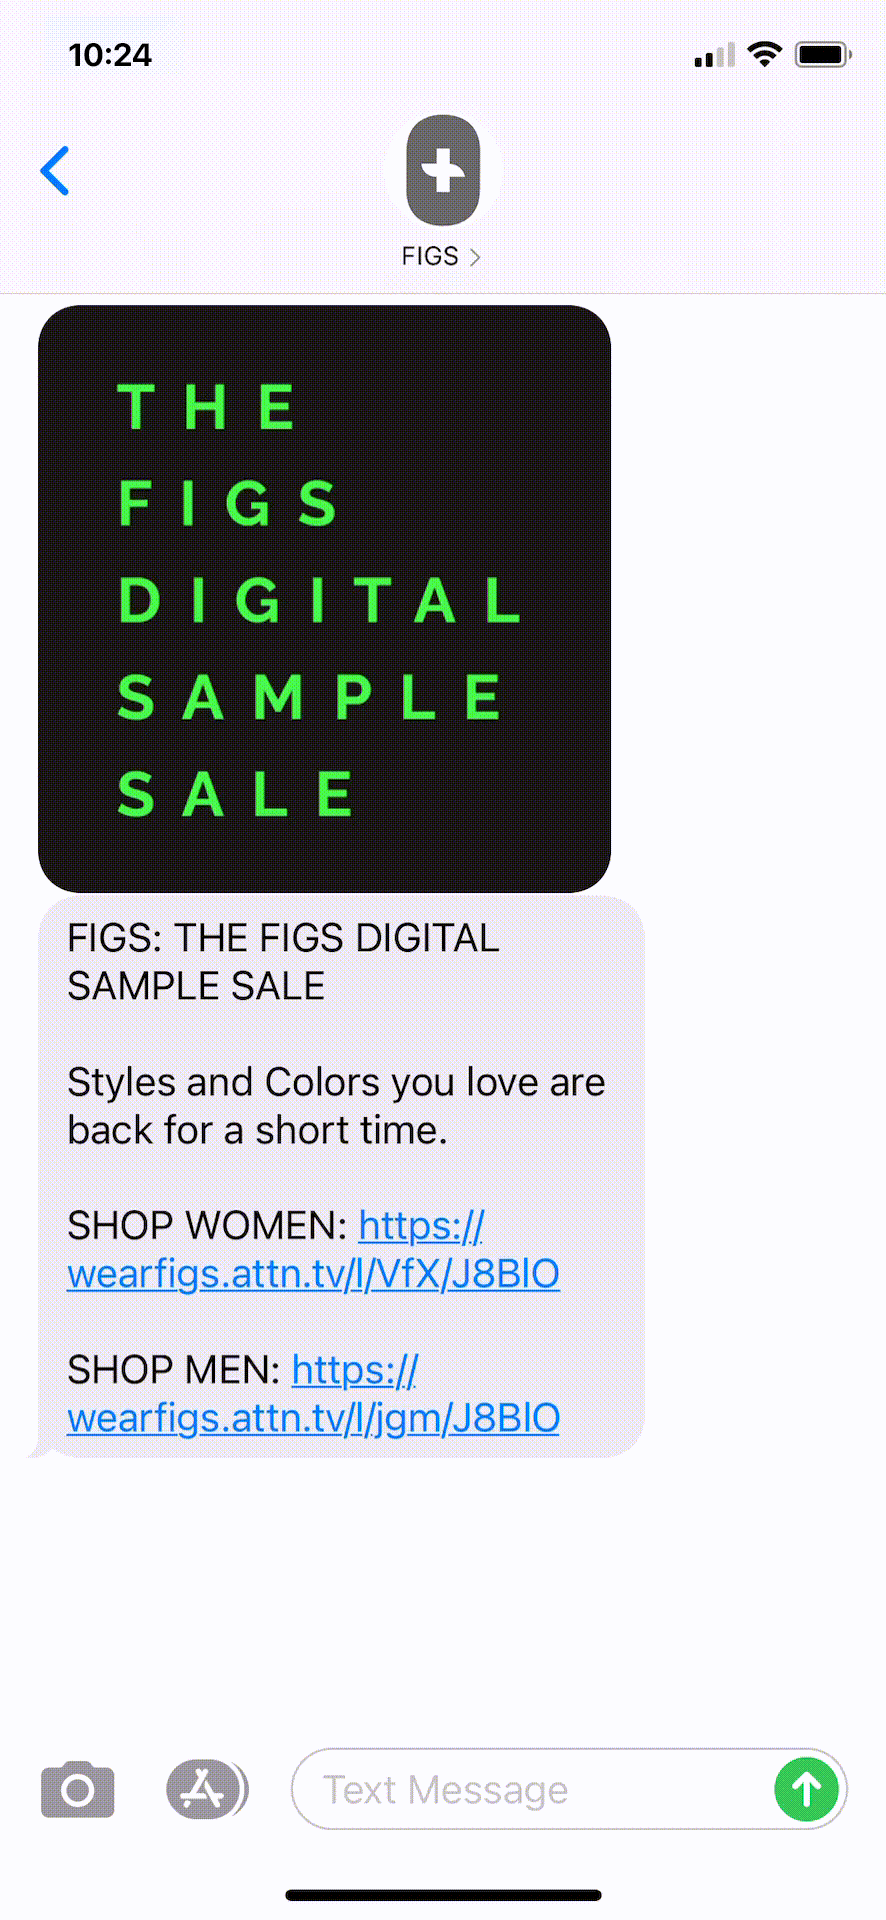 FIGS-Text-Message-Marketing-Example-03.18.2021